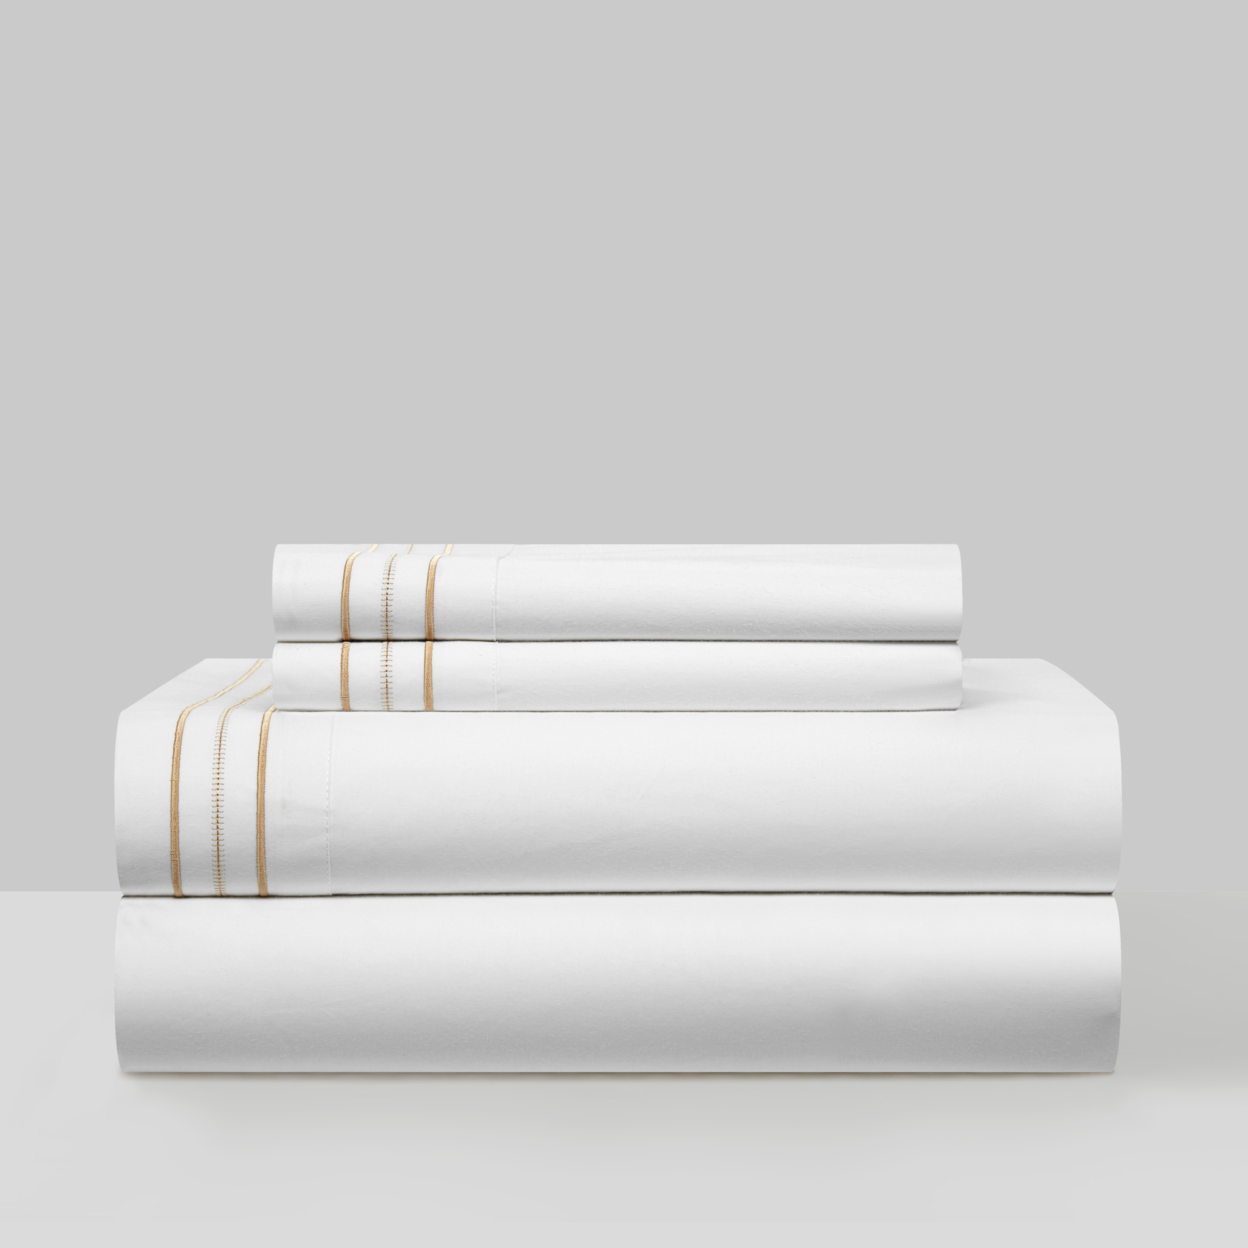 4 Piece Freeya Organic Cotton Sheet Set Solid White With Dual Stripe Embroidery - Gold, King